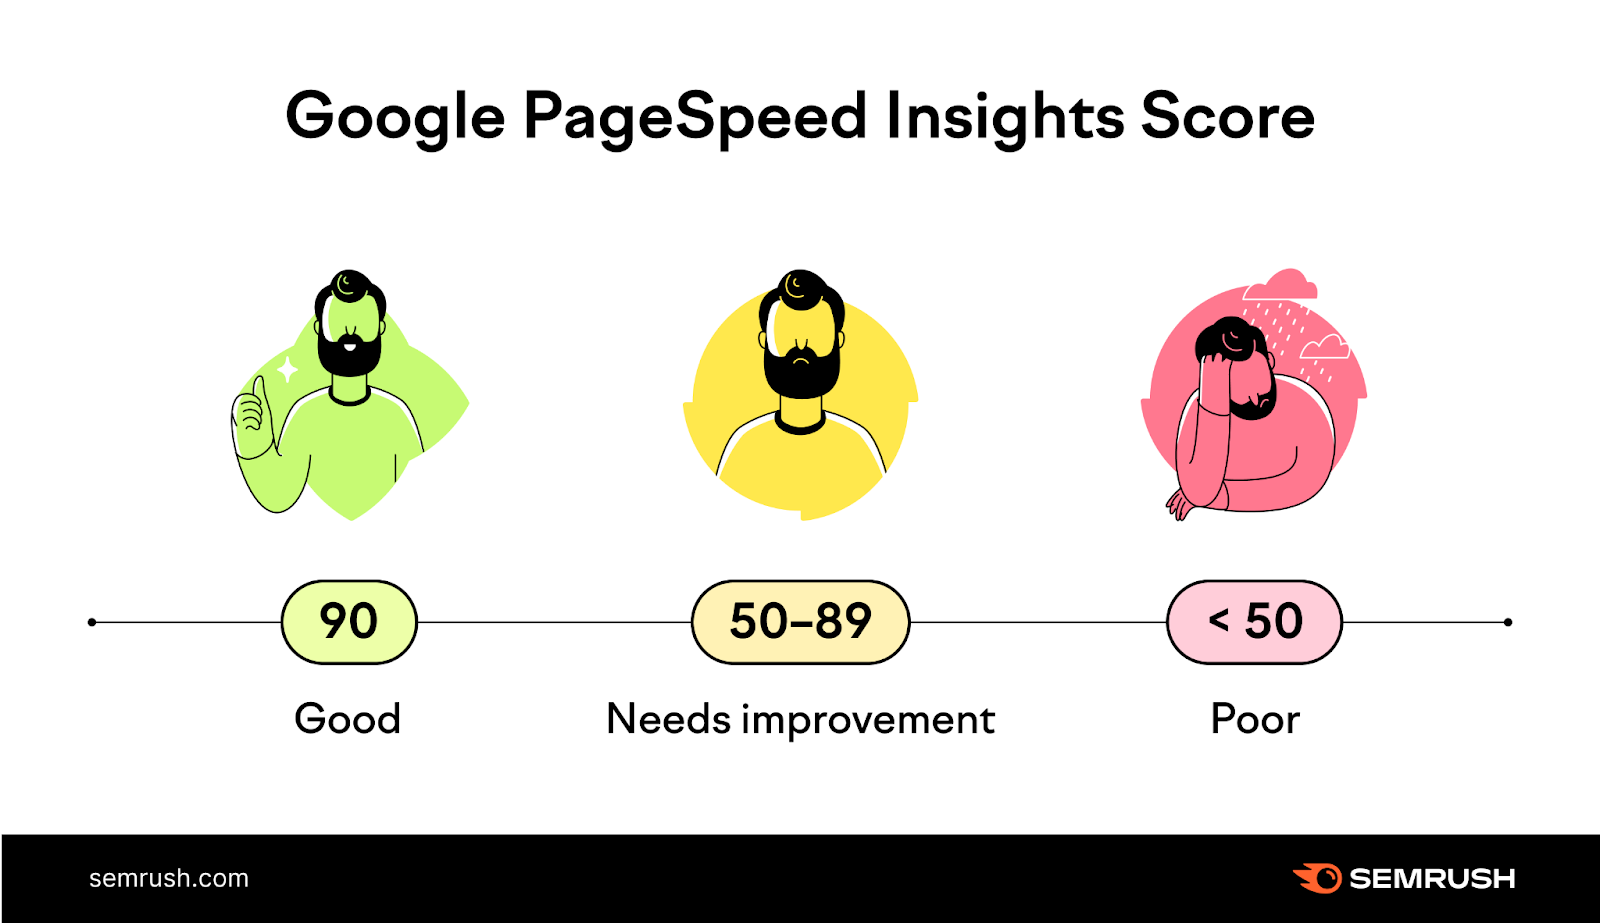 "Google Page Speed Insights Score" infographic